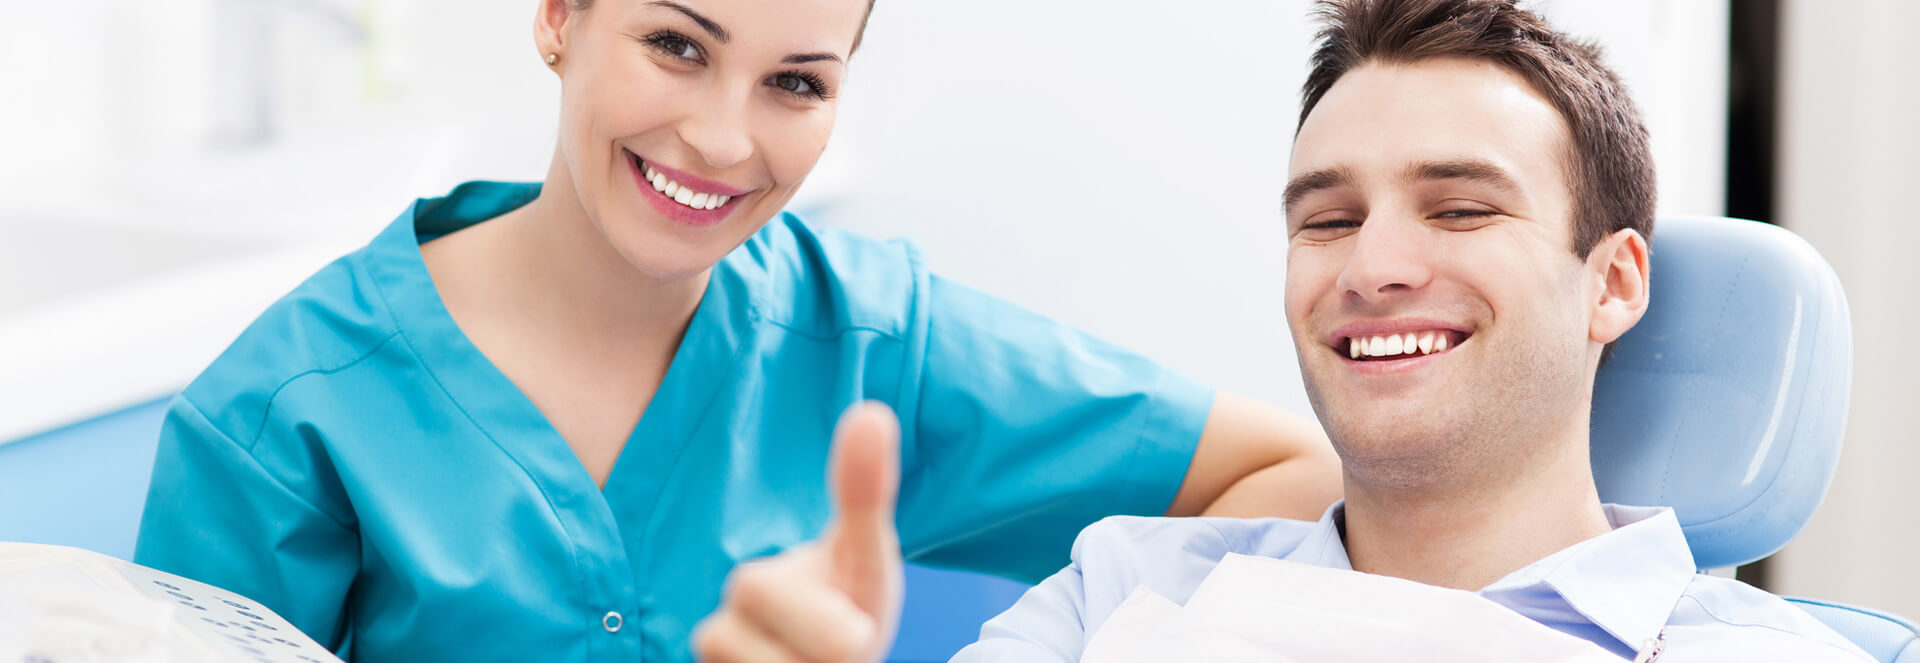 Dental assistant smiling and male patient showing thumbs up